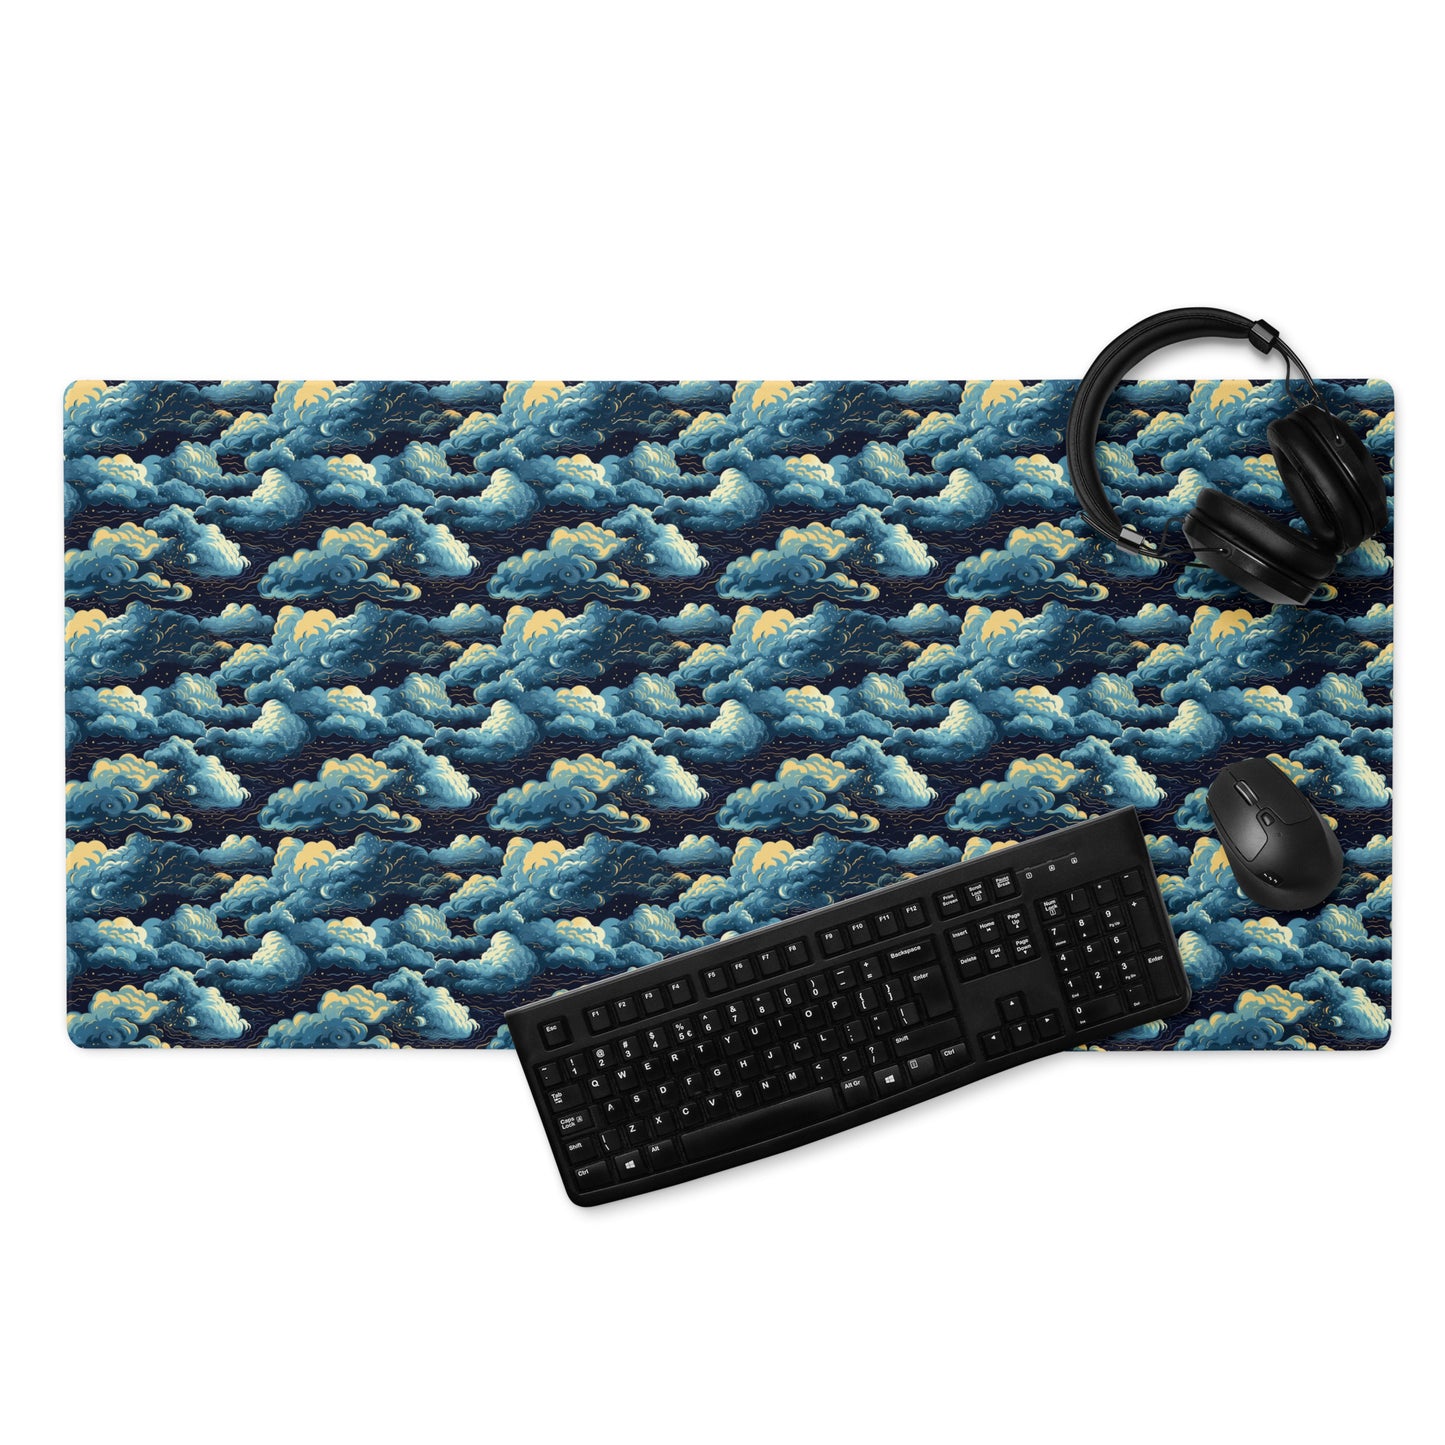 A 36" x 18" desk pad with a cloudy night sky pattern. With a keyboard, mouse and headphones sitting on it.